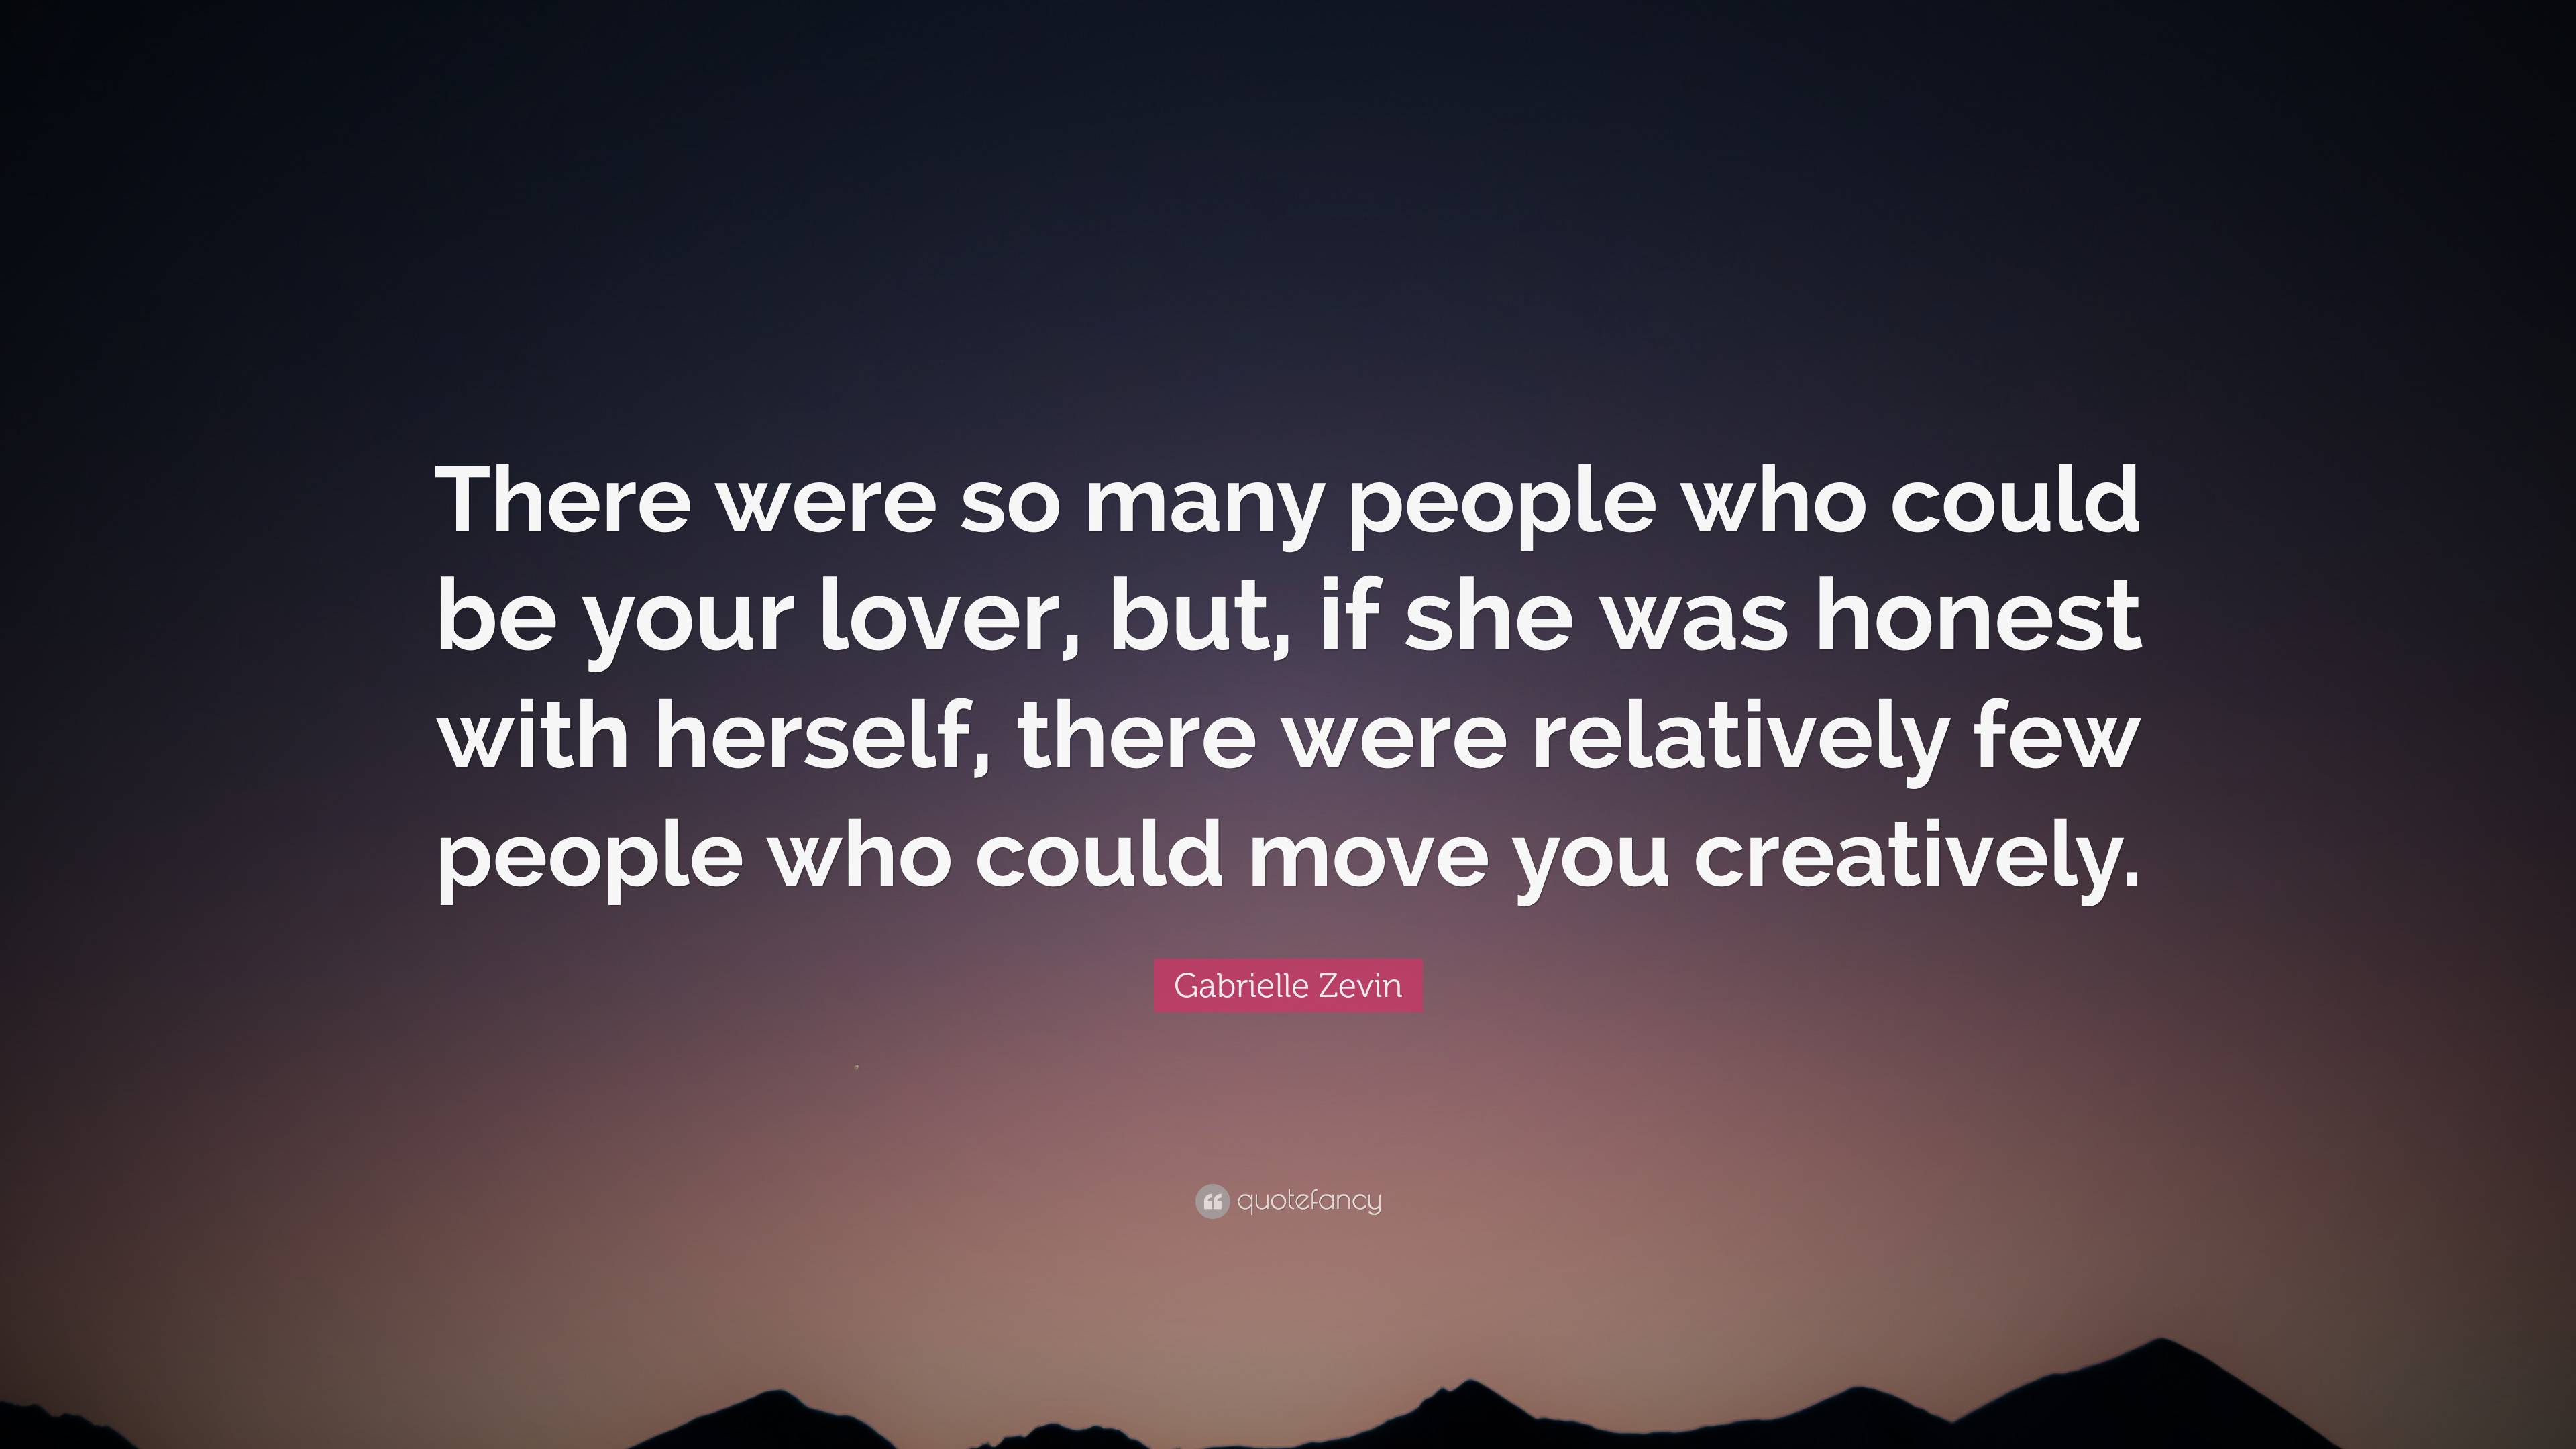 Gabrielle Zevin Quote: “There were so many people who could be